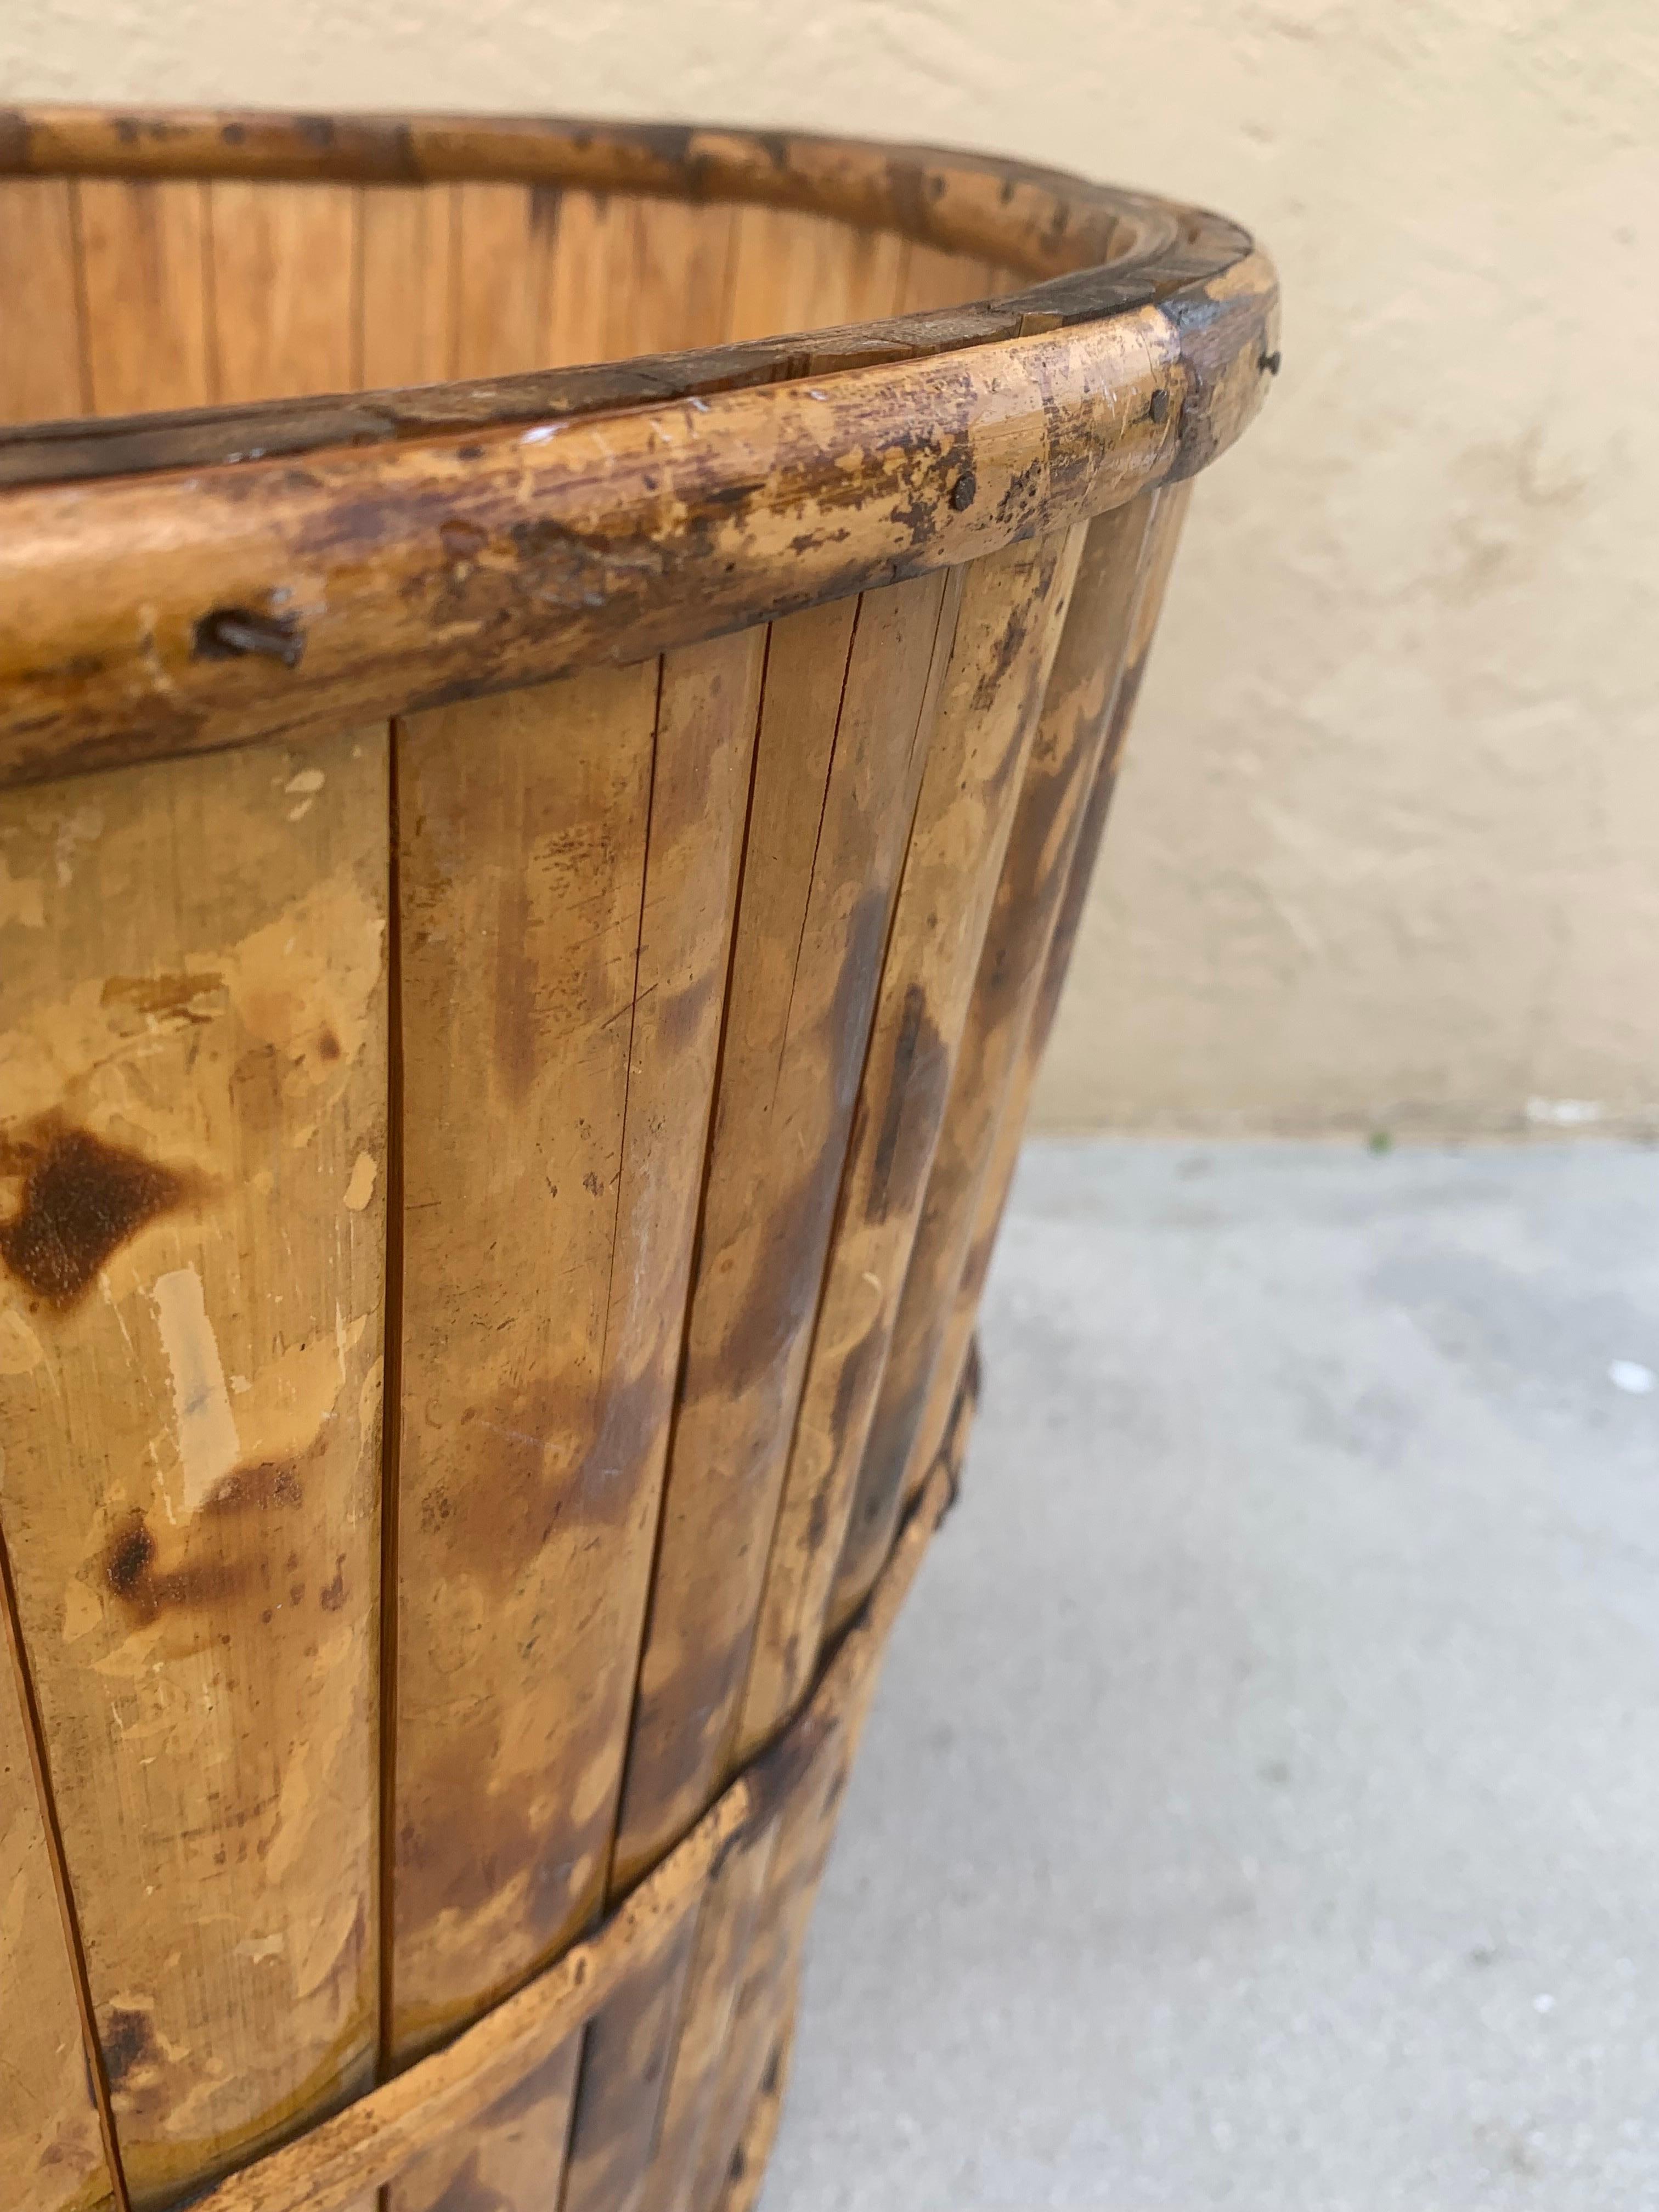 Vintage British Colonial style burnt bamboo planter. Made well and kept in great condition. Bamboo panels have been hand burnt to display a beautiful tortoiseshell pattern. 

Would look great in any room especially when paired with other natural